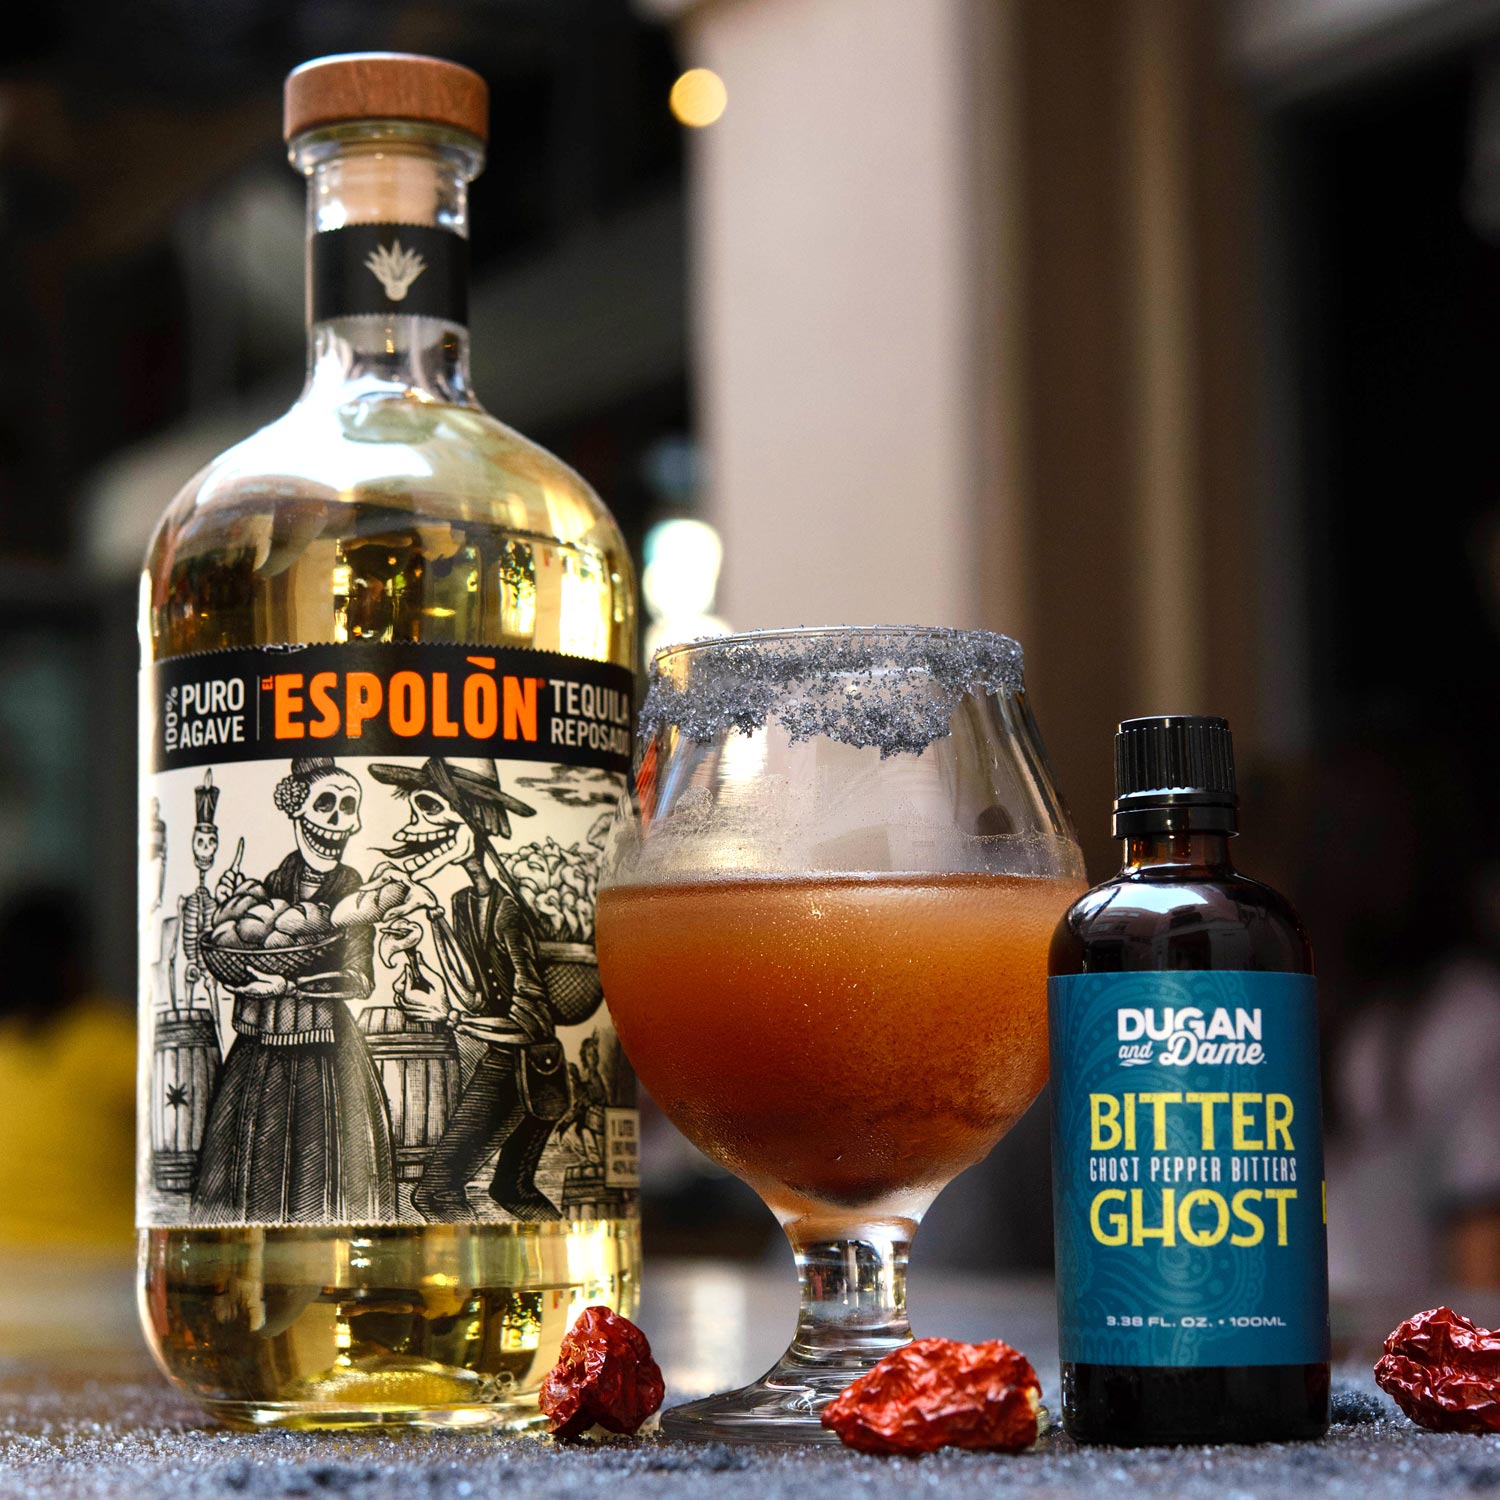 Dugan and Dame Bitter Ghost Ghost Pepper Bitters Drink